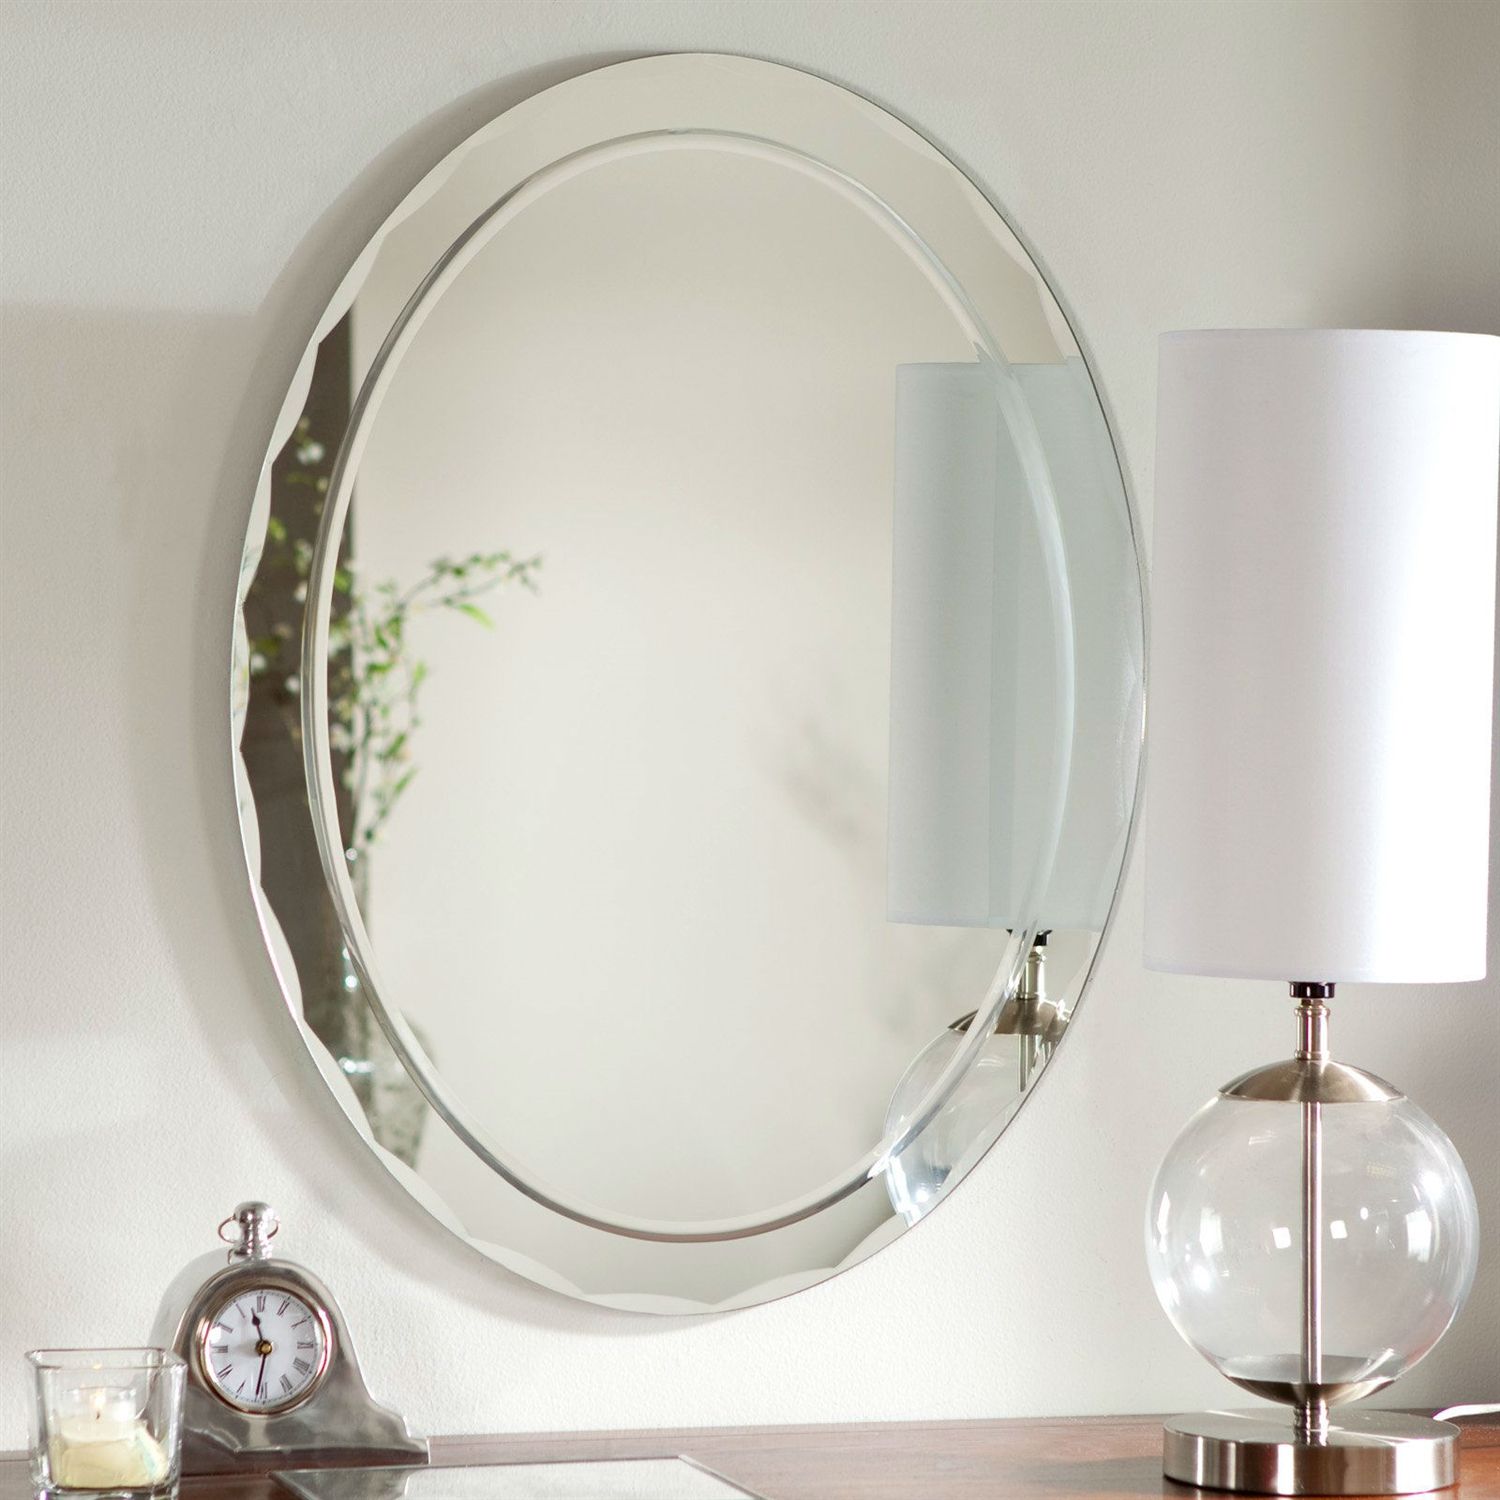 Oval Frameless Bathroom Vanity Wall Mirror With Beveled Edge Scallop Border Within Frameless Tri Bevel Wall Mirrors (View 12 of 15)